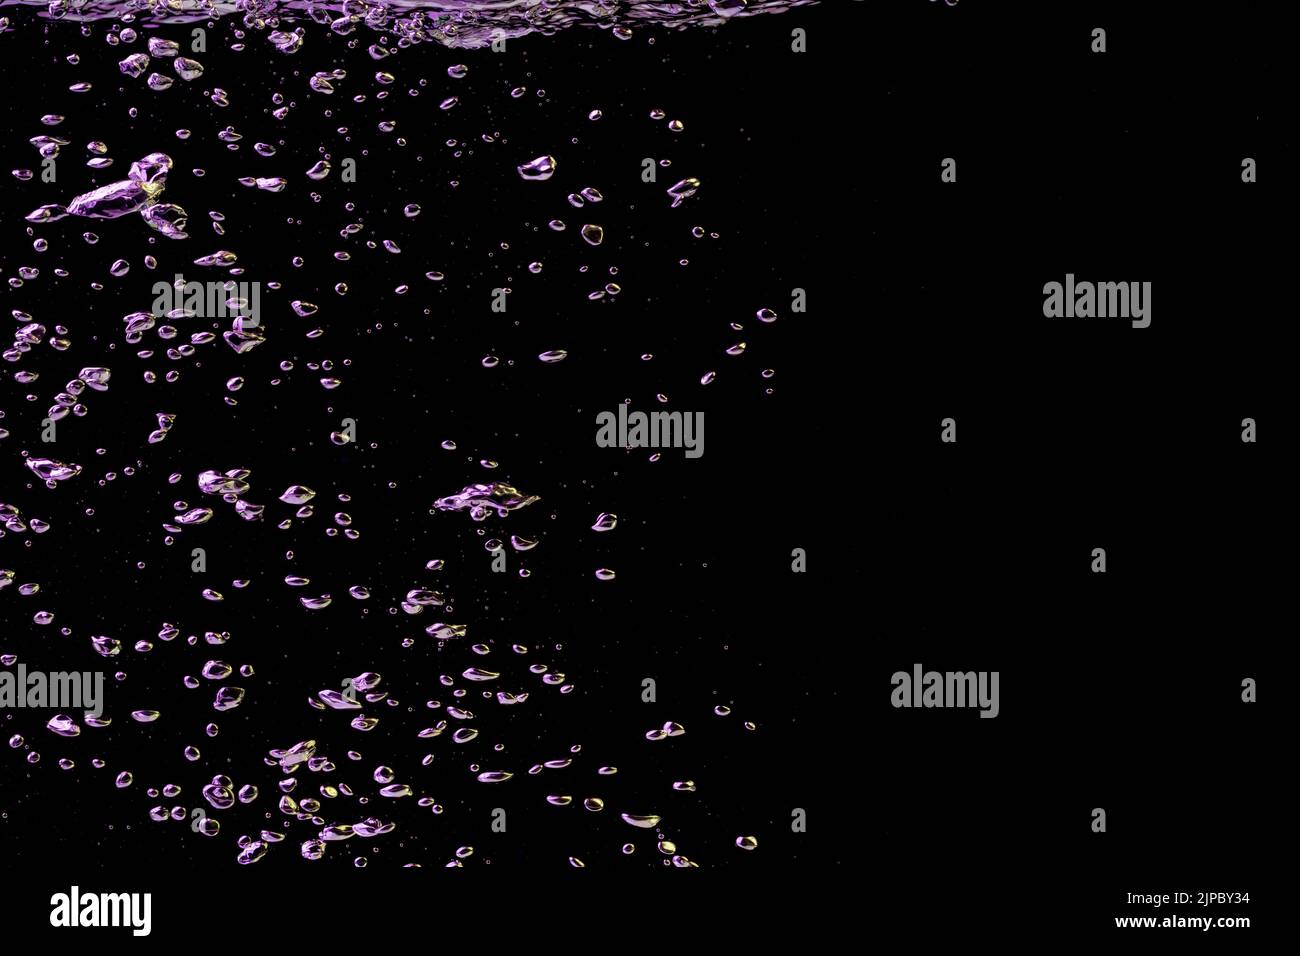 A bubble splash in transparent clear water liquid in yellow and purple light on a black nature background Stock Photo